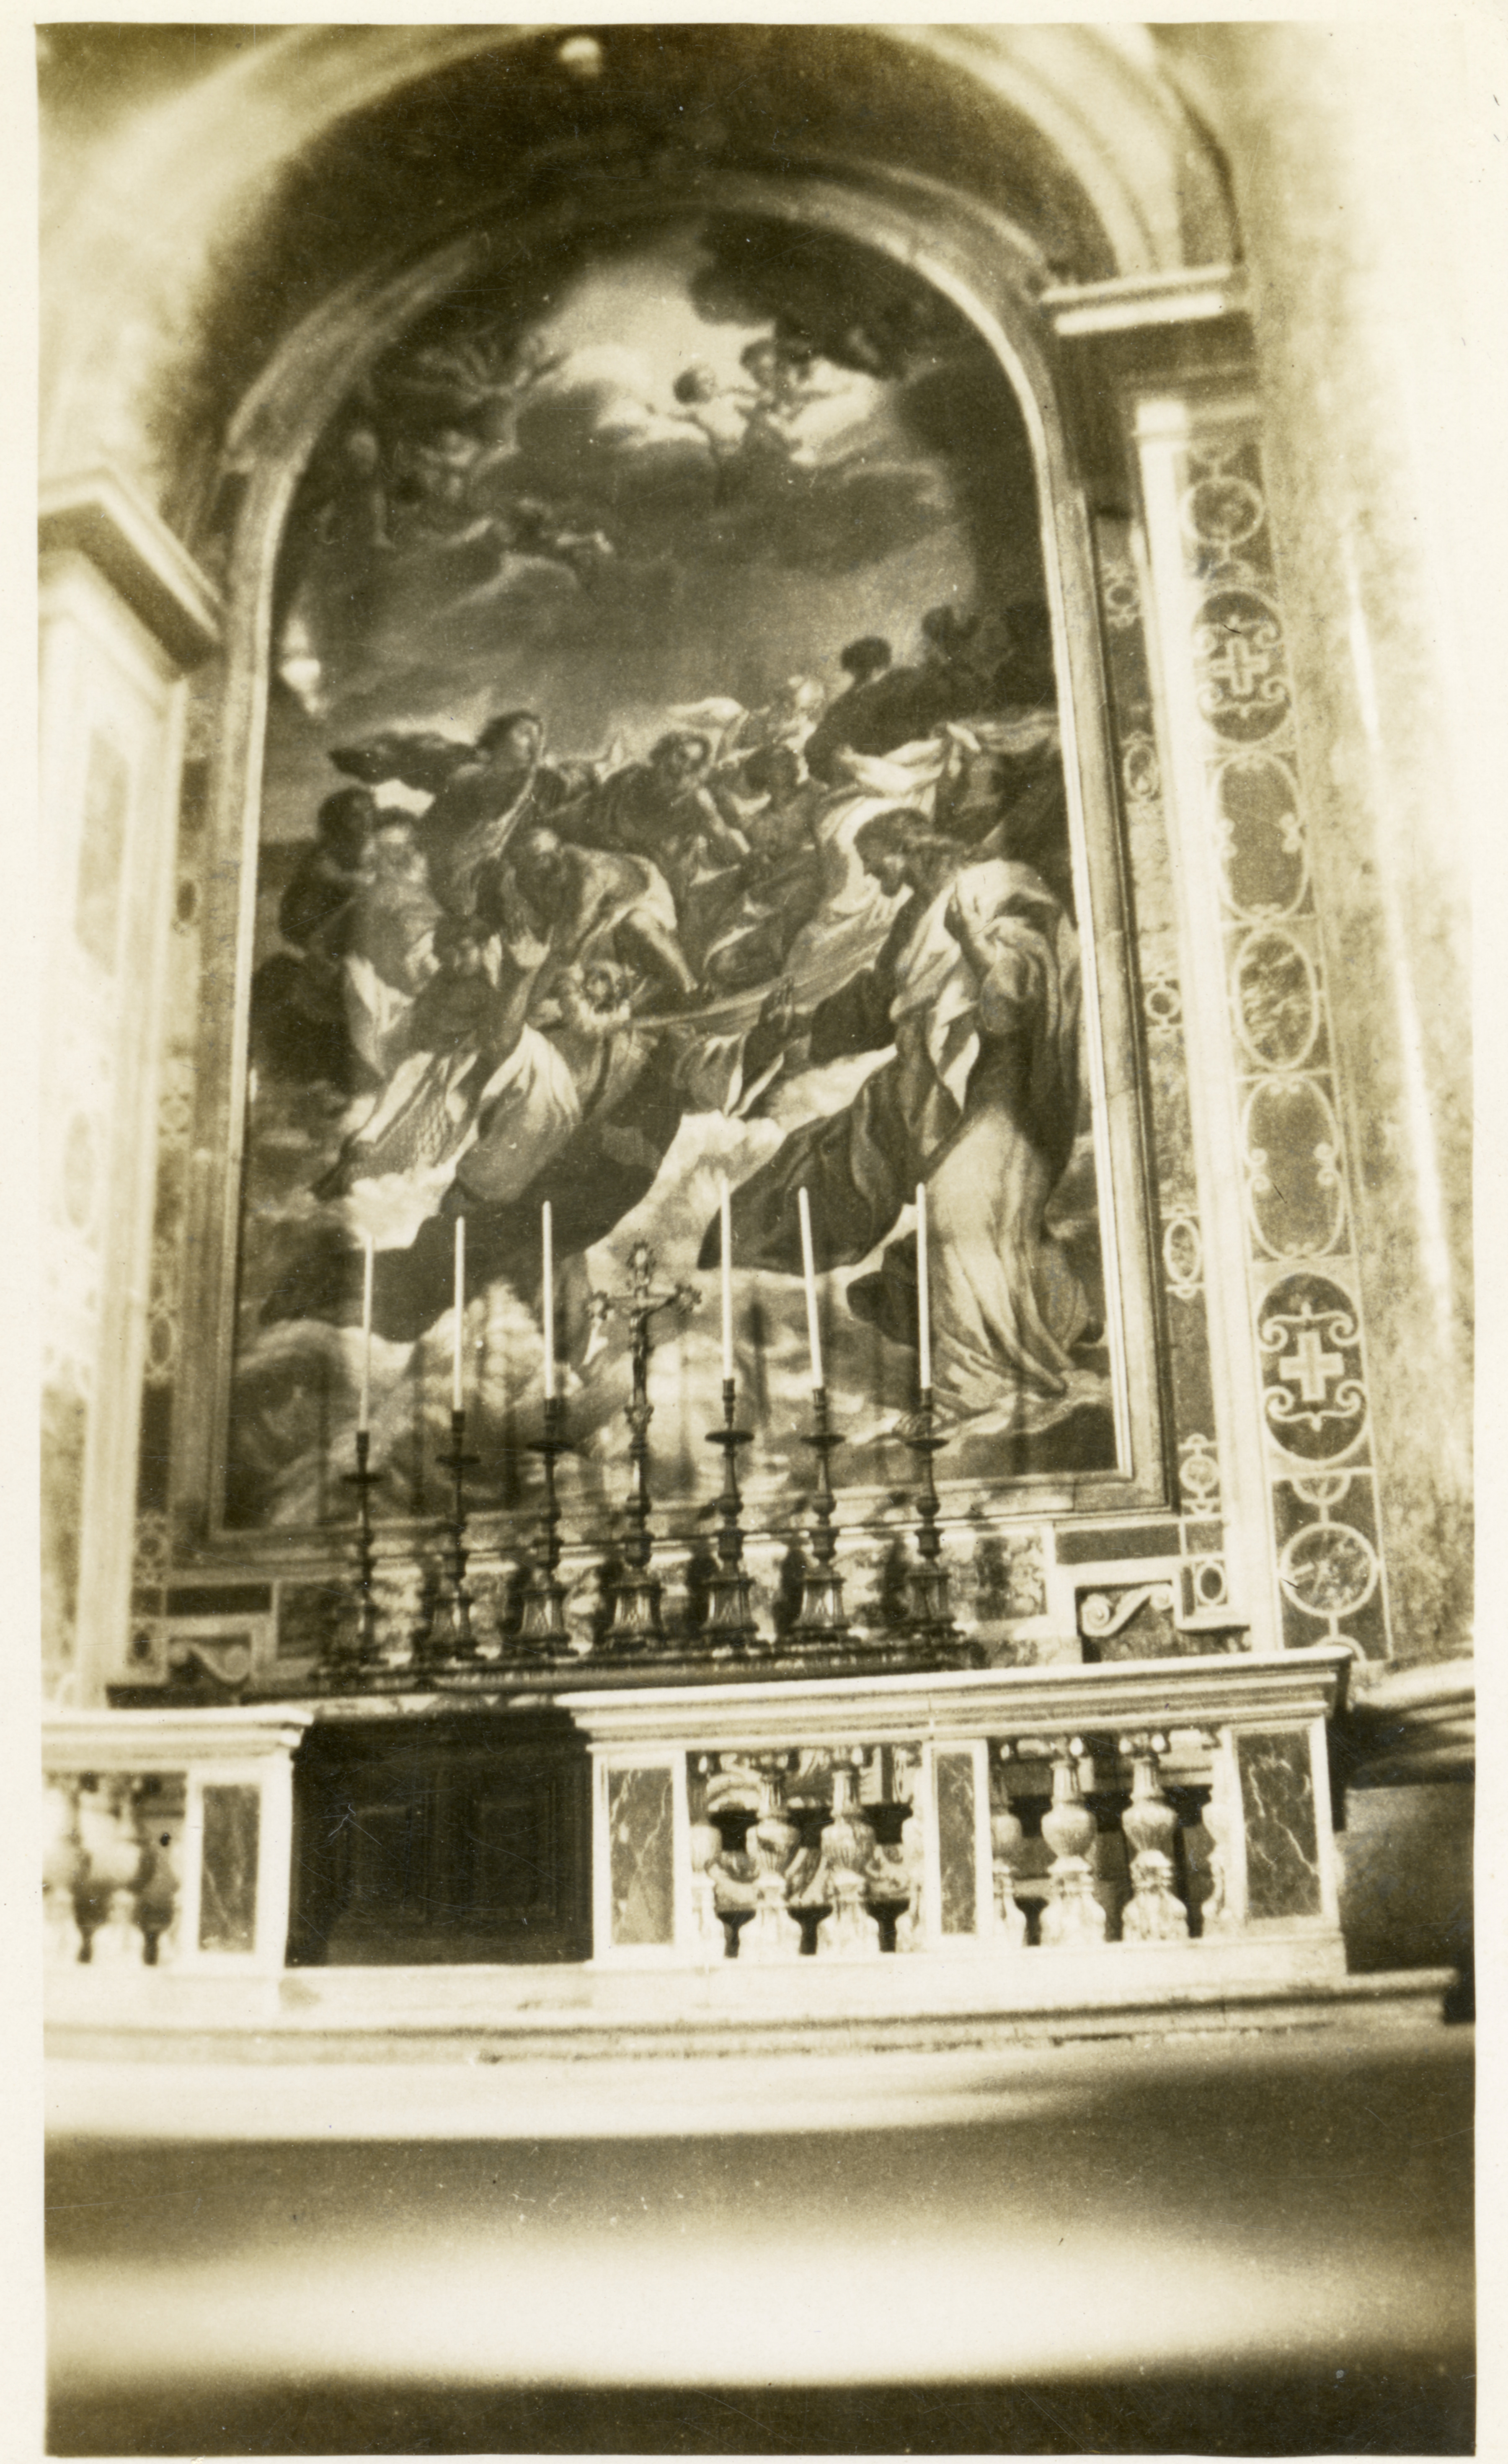 Mosaic in Rome, Italy in 1944 or 1945 | The Digital Collections of the ...